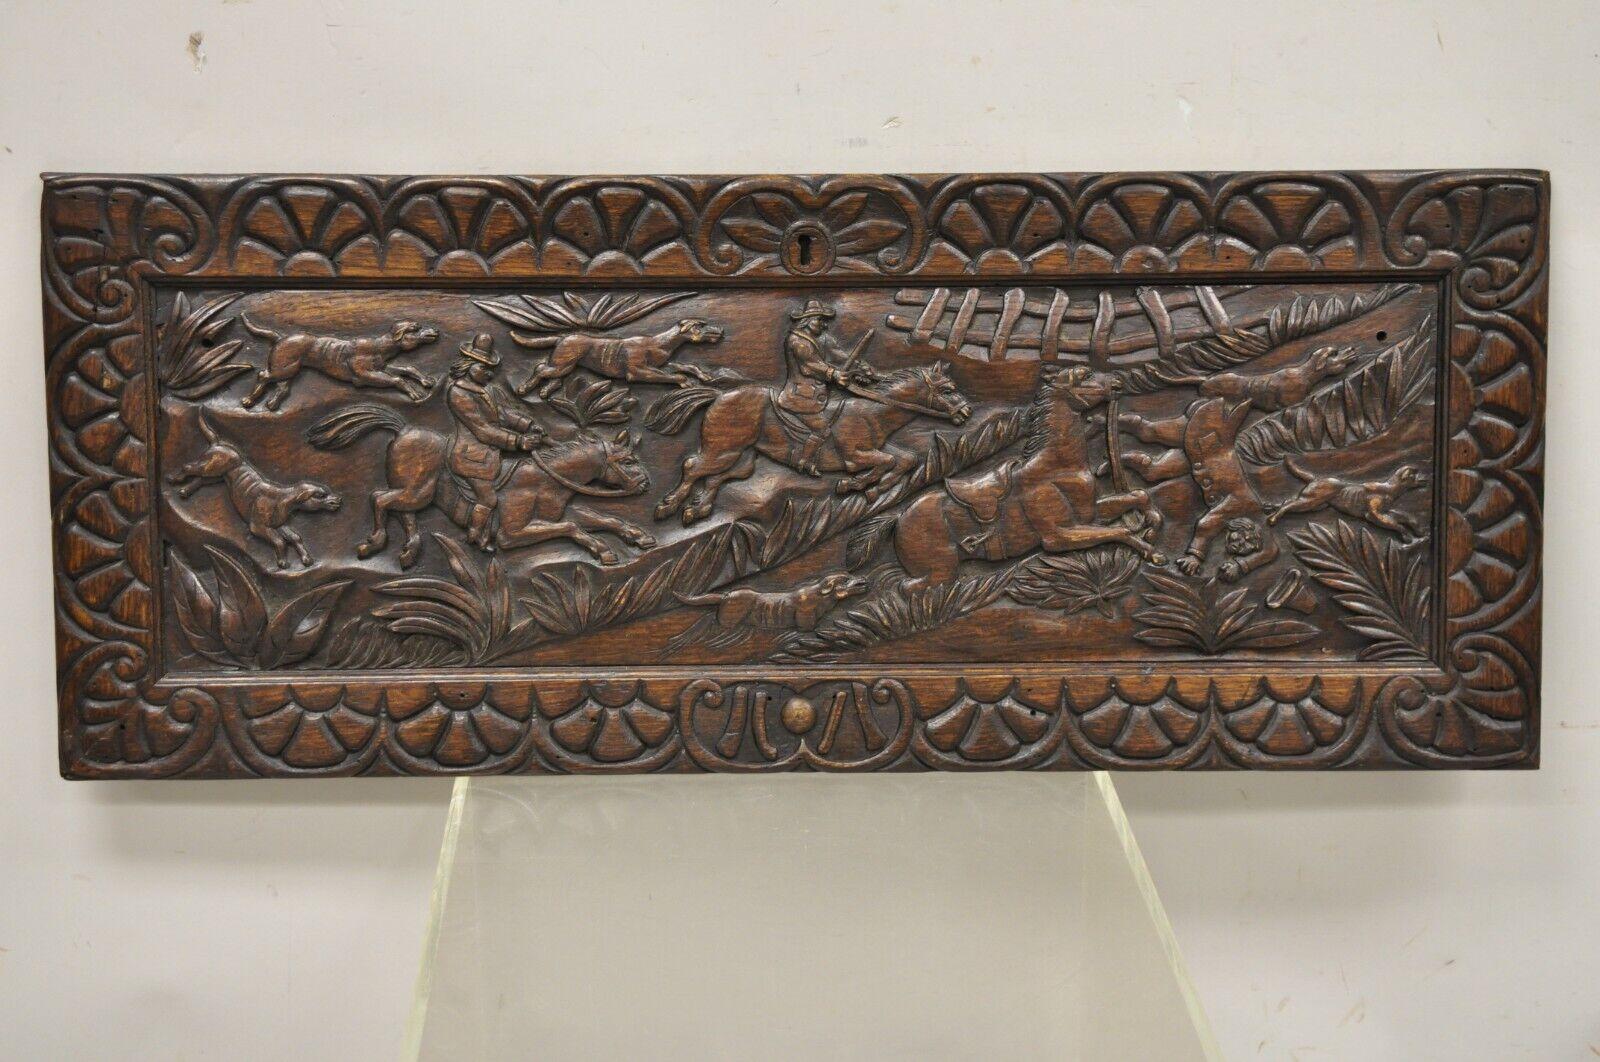 Antique Oak Wood Jacobean Relief Carved Architectural Salvage Wall Panel Plaque. Item featured believed to be salvaged door front from an antique oak secretary desk, relief carved figural hunt scene with horses and riders, and hunting dogs, very